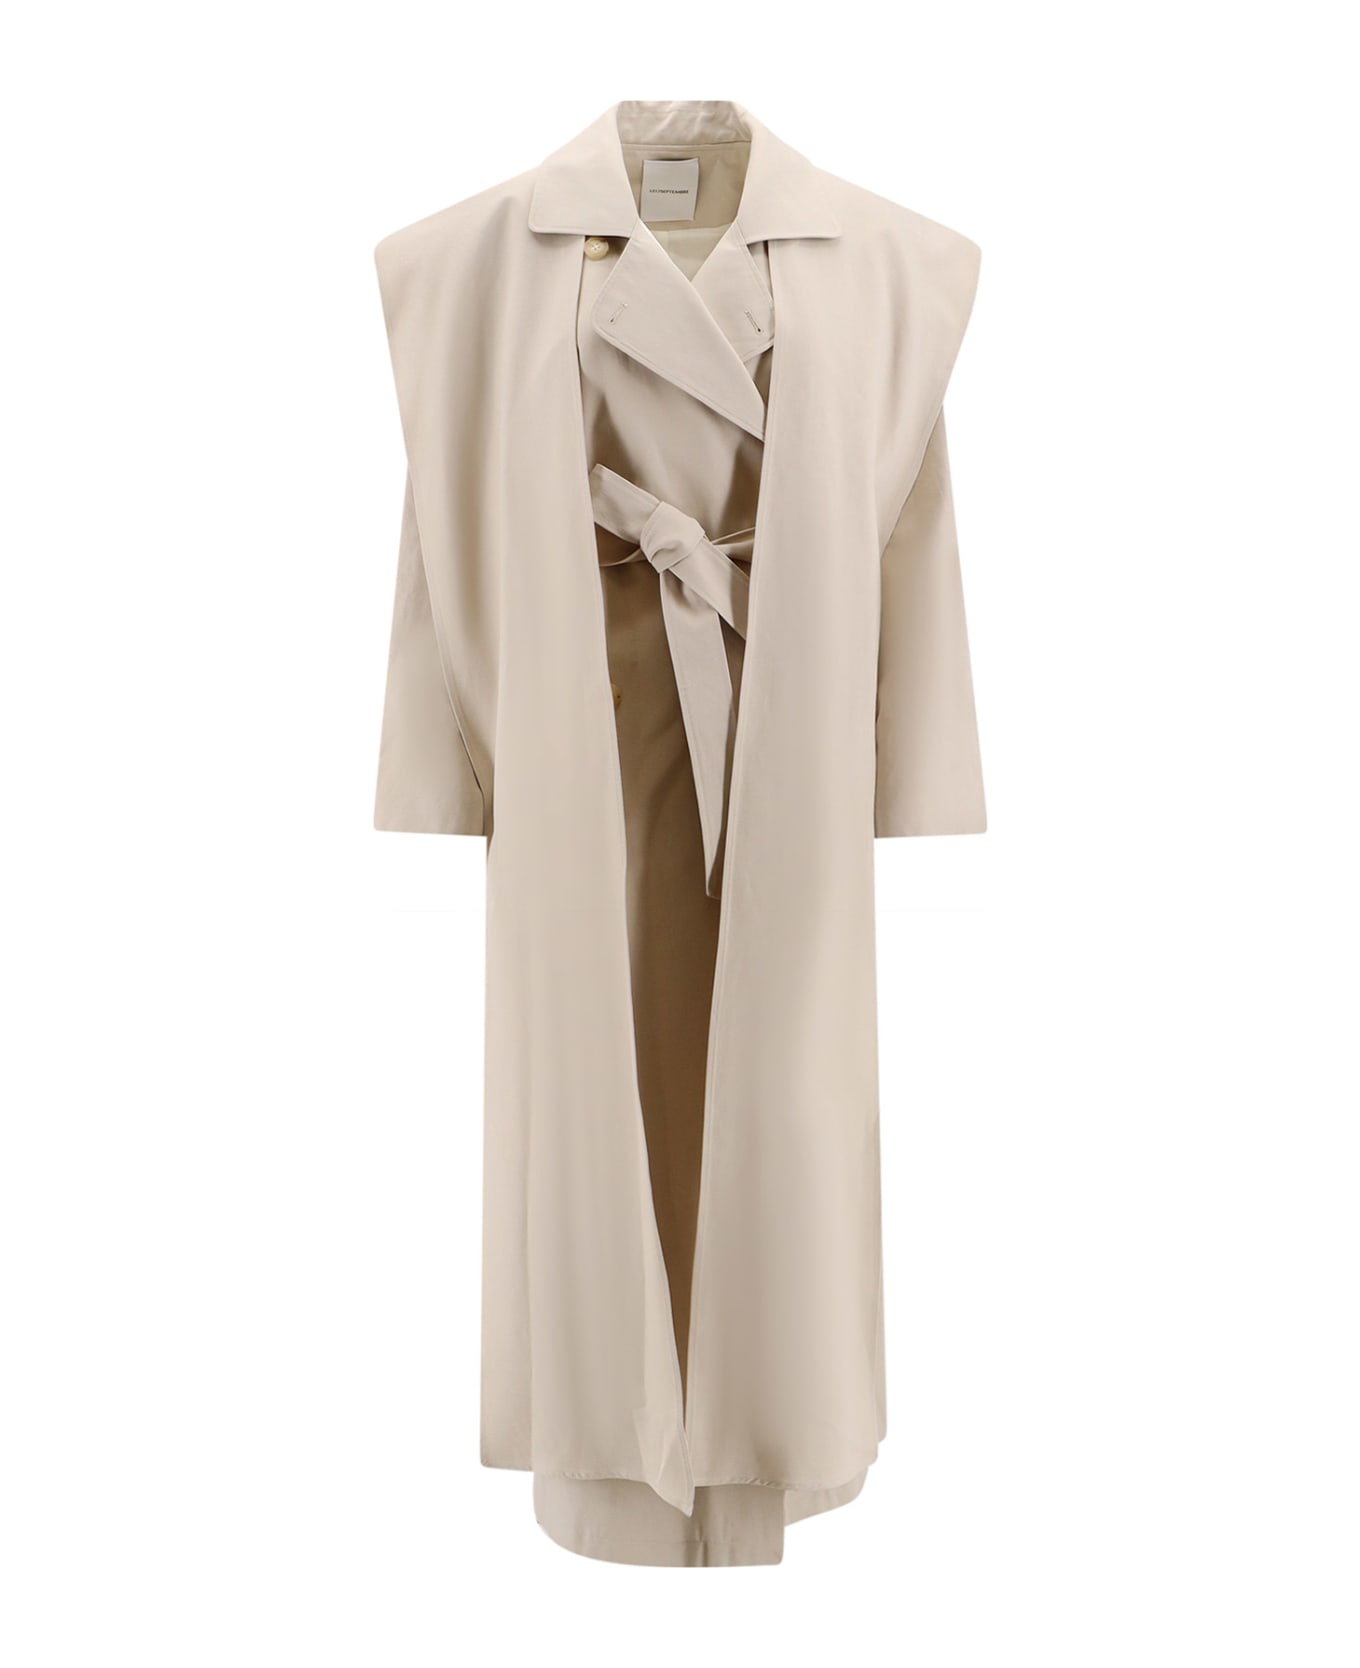 Le 17 Septembre Trench - Beige レインコート